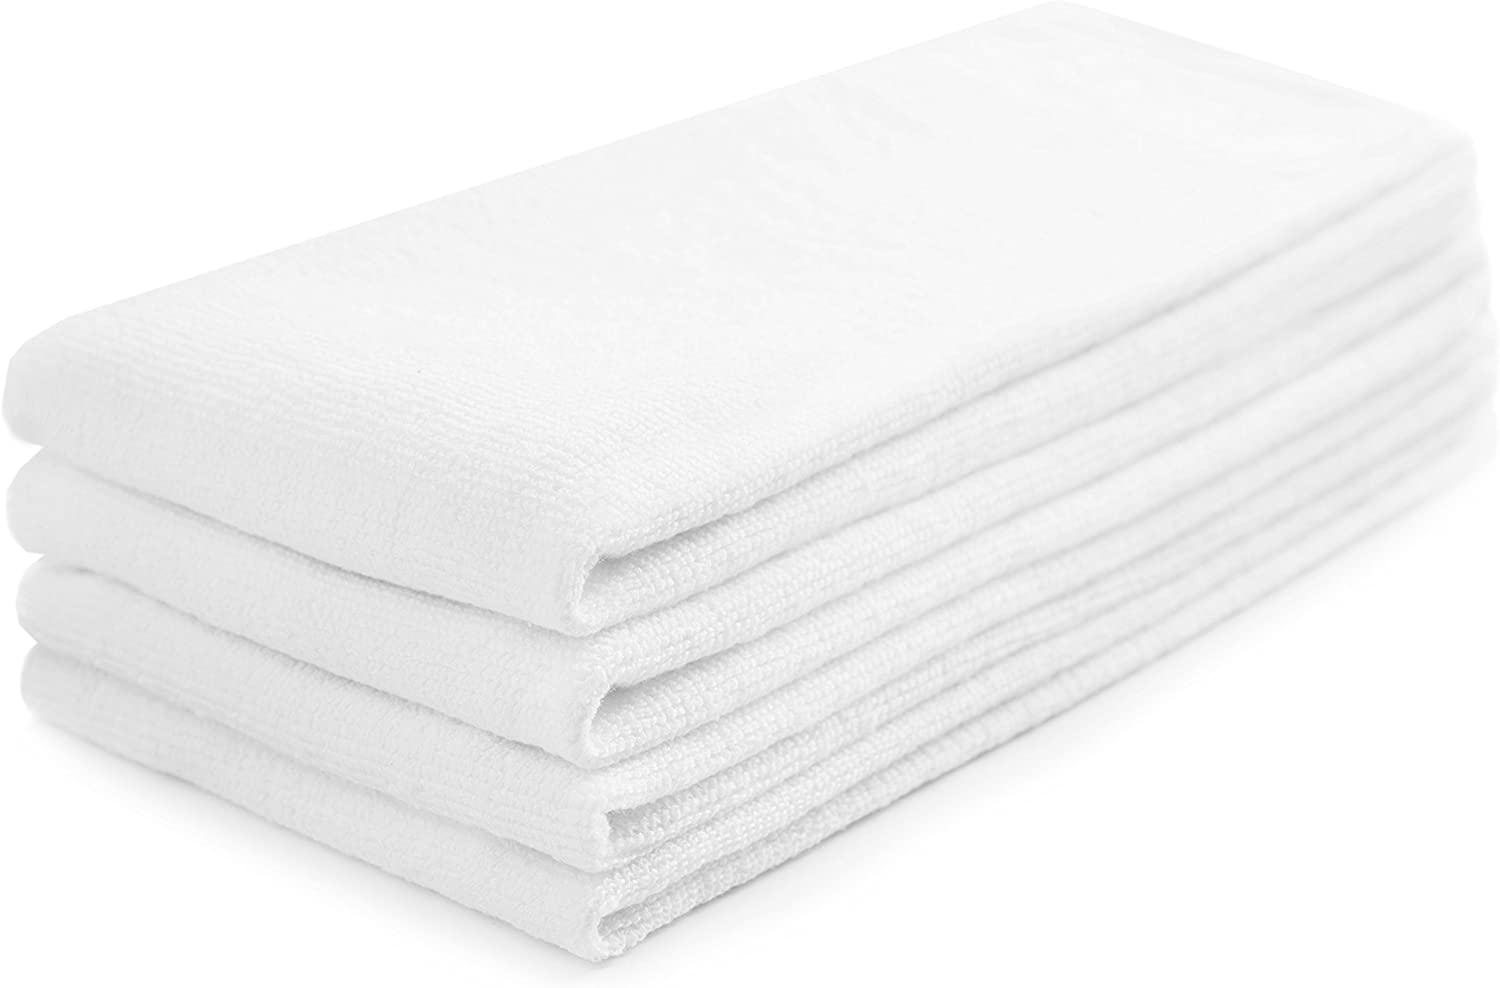 Homaxy 100% cotton Terry Kitchen Towels(White, 13 x 28 inches